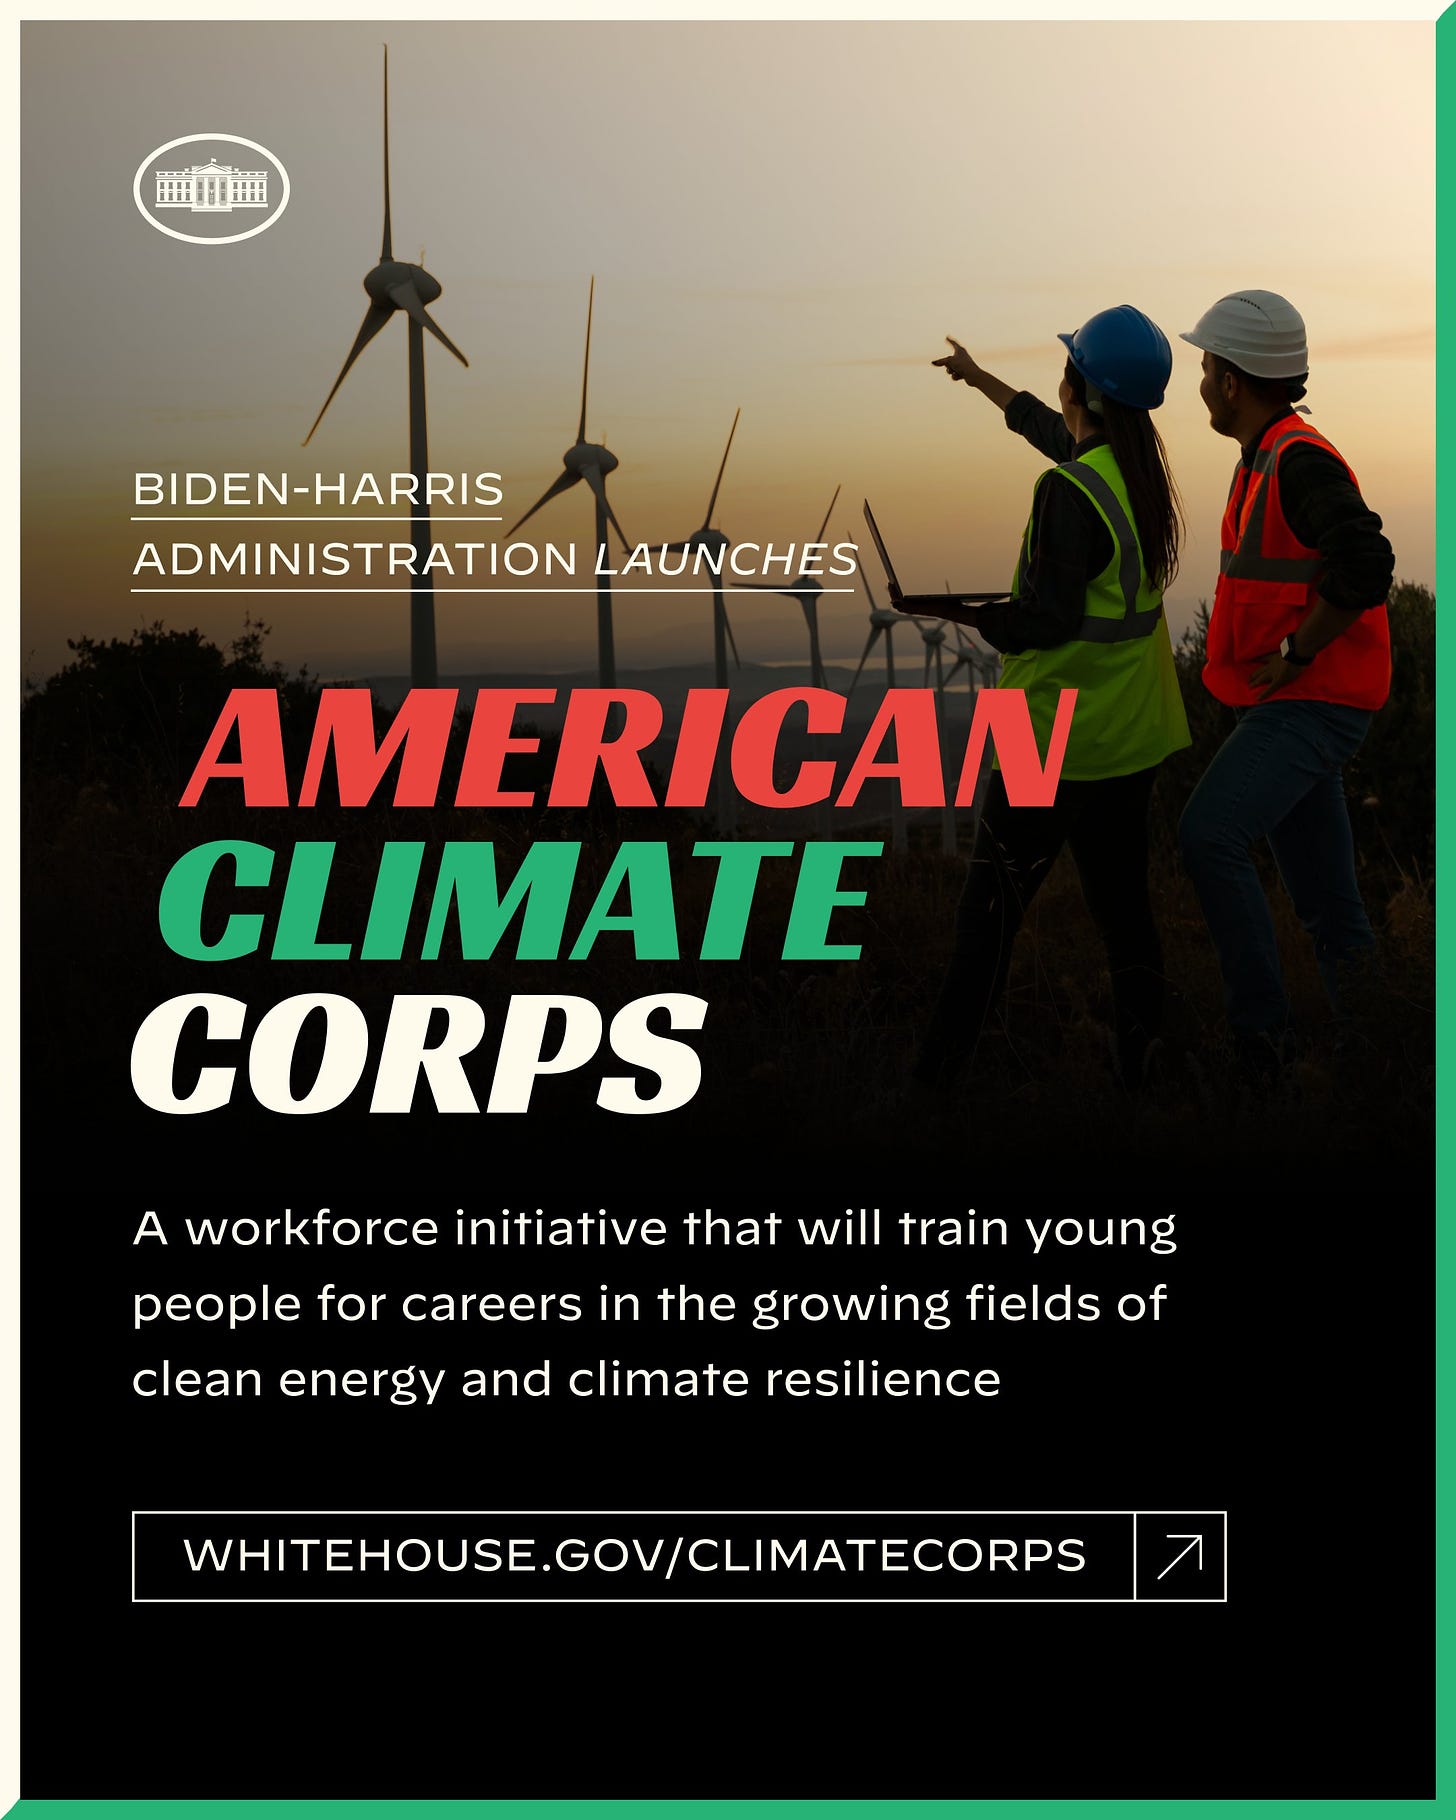 Biden-Harris Administration Launches
American Climate Corps

A workforce initiative that will train young people for careers in the growing fields of clean energy and climate resilience

whitehouse.gov/ClimateCorps